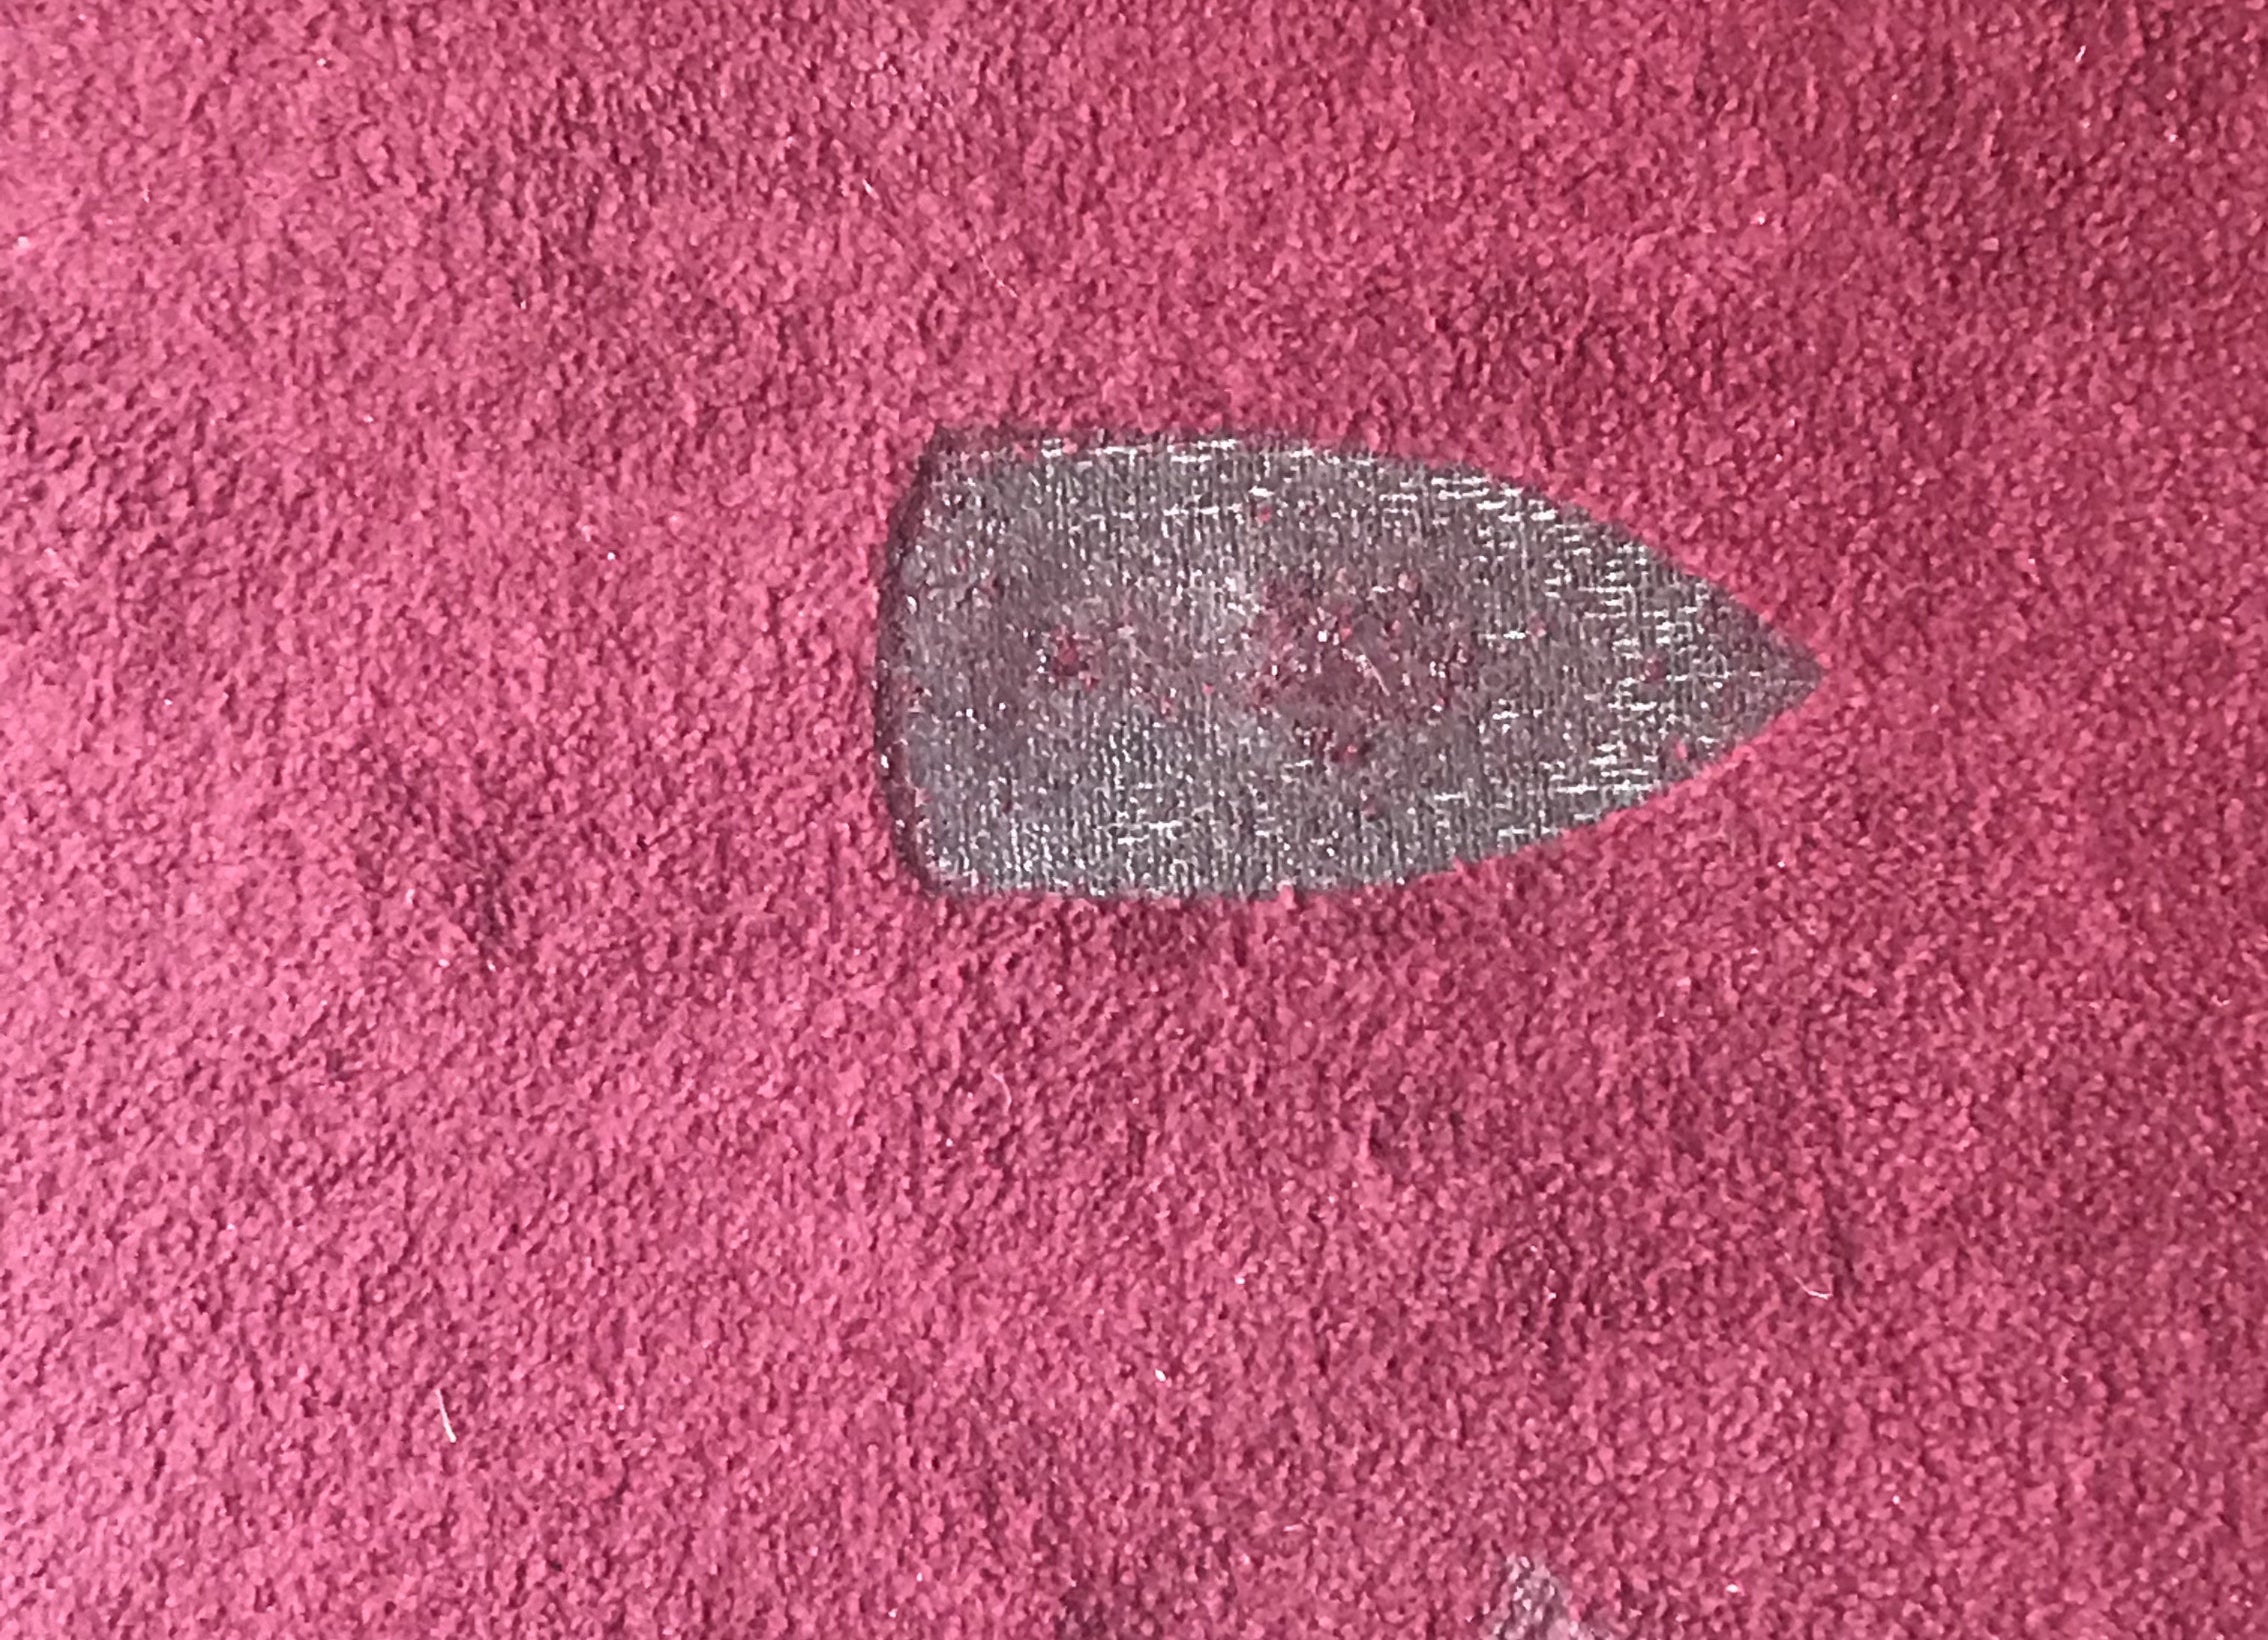 a clothes iron shaped burn mark in a carpet